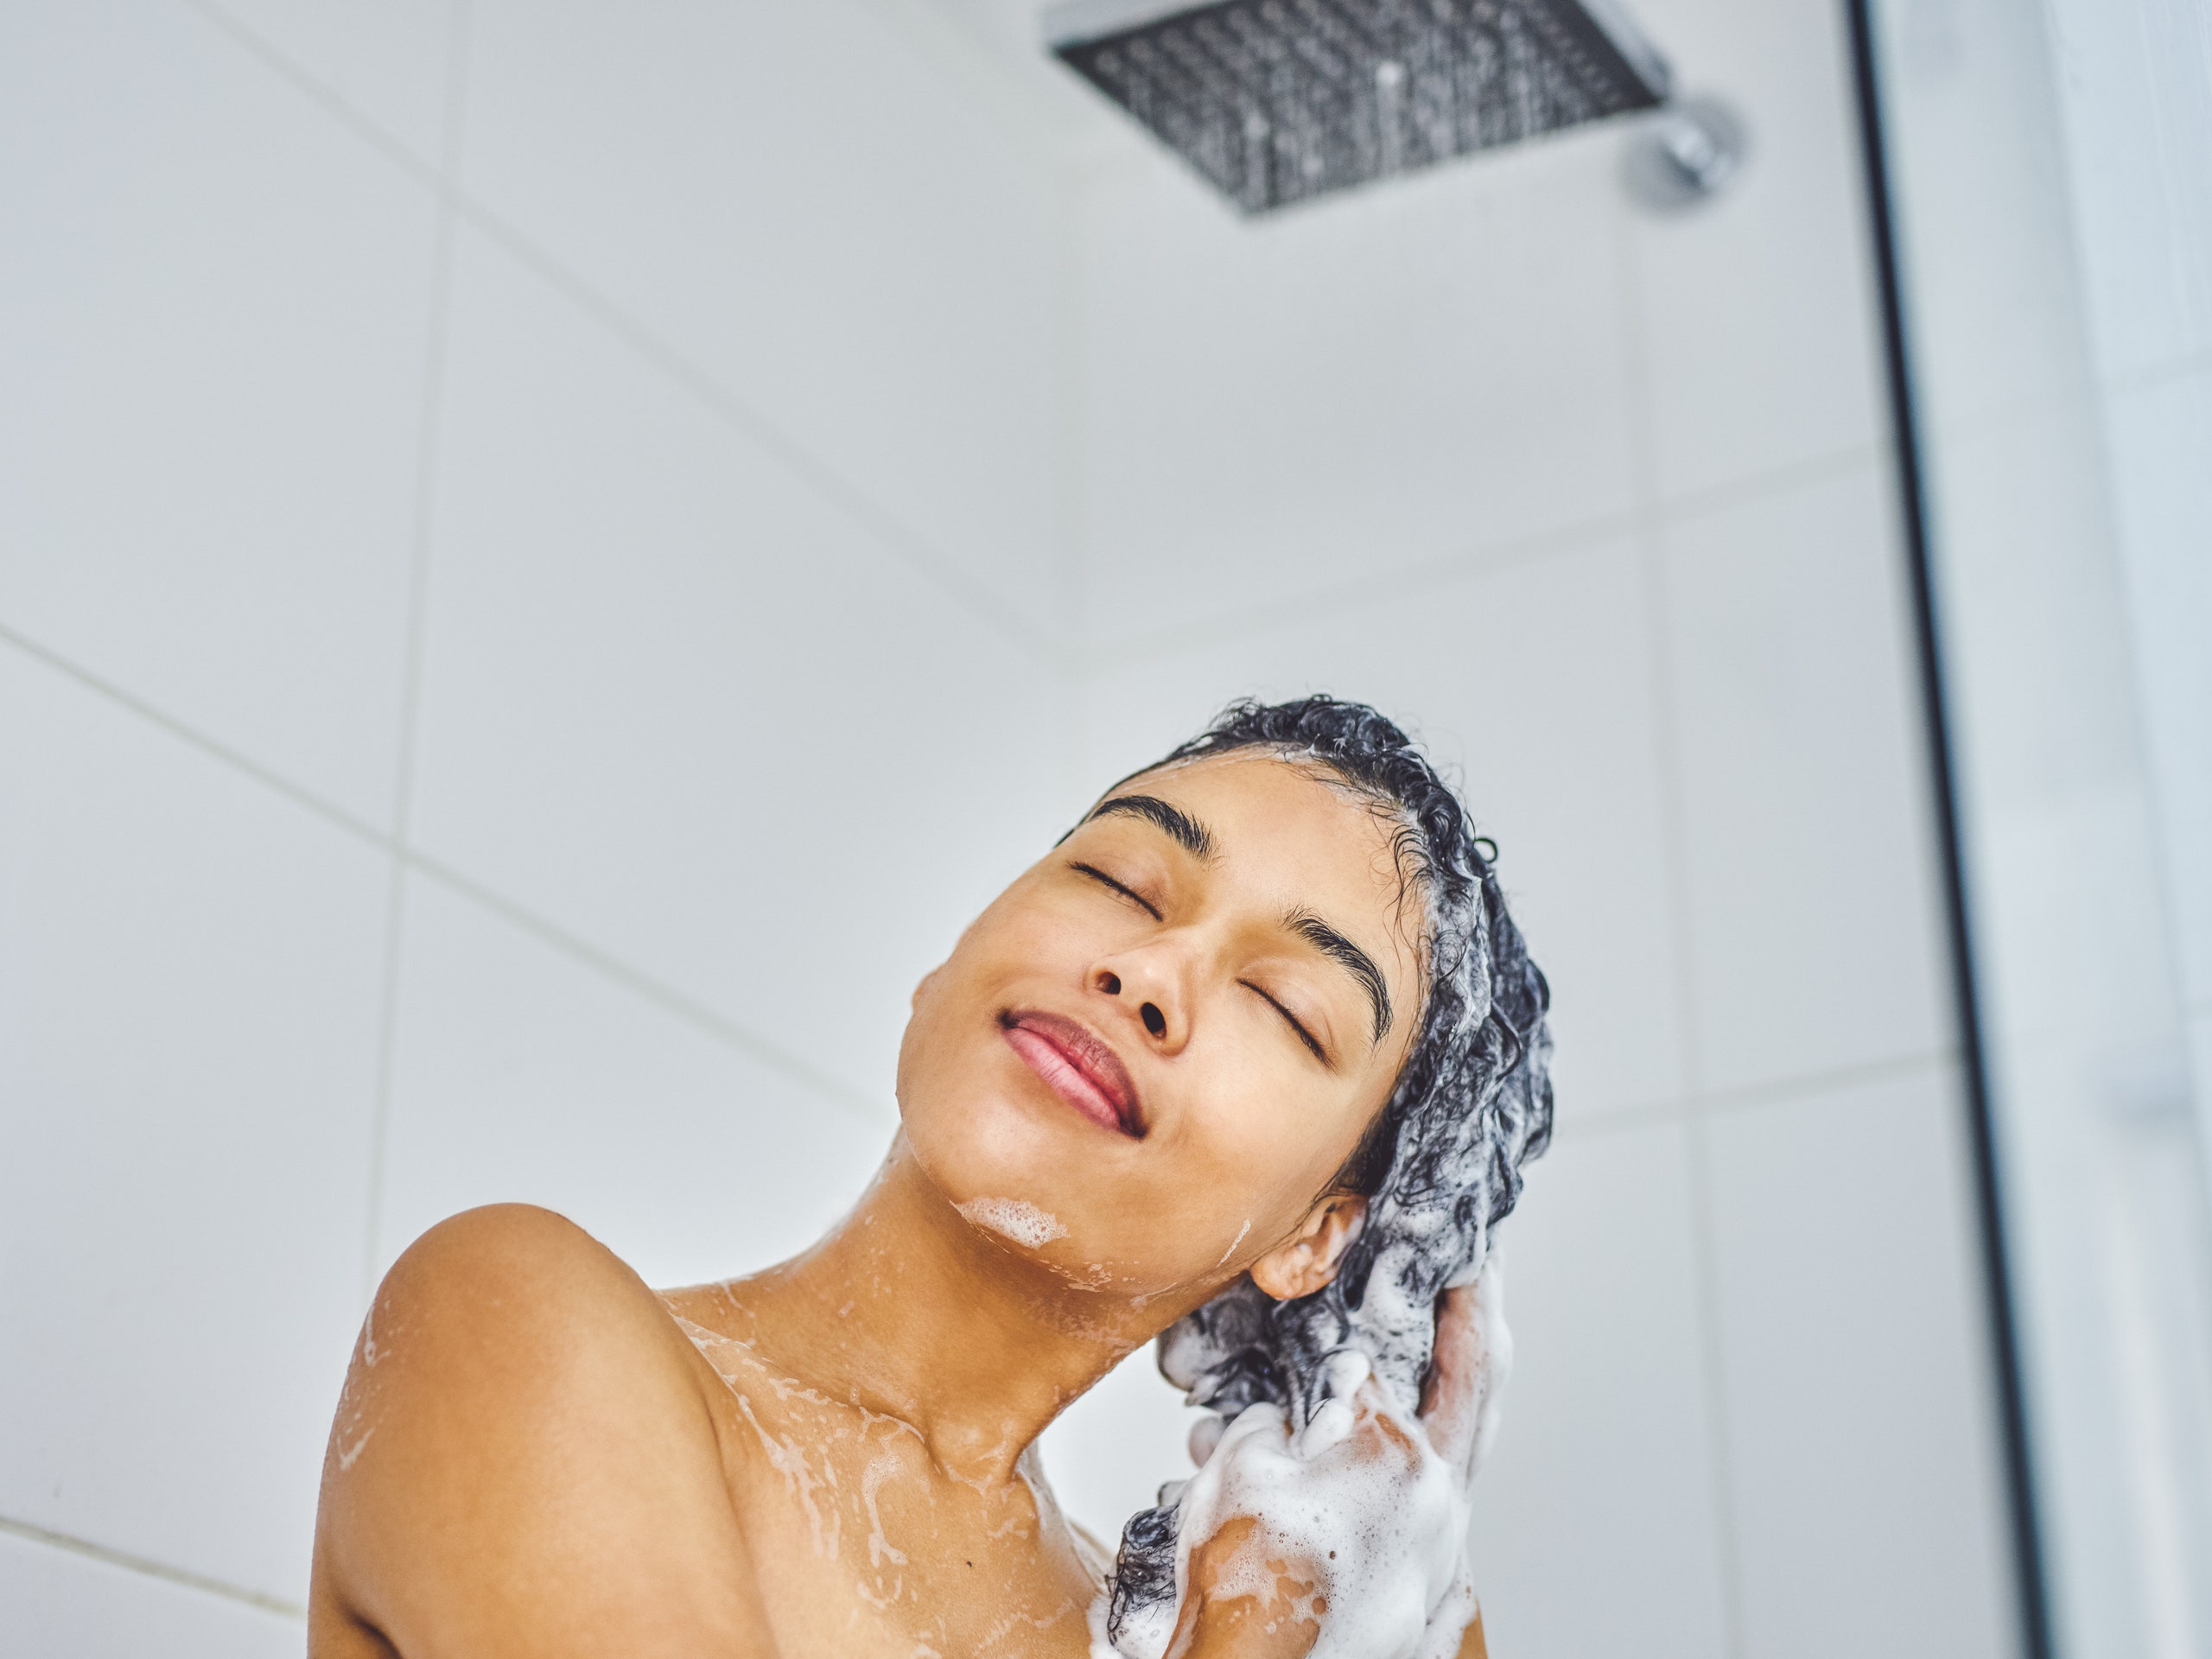 What Do Dermatologists Recommend to Wash Your Body With? 9 9edd41f94a6e4ad5b82b4063936b6d2f 9edd41f94a6e4ad5b82b4063936b6d2f